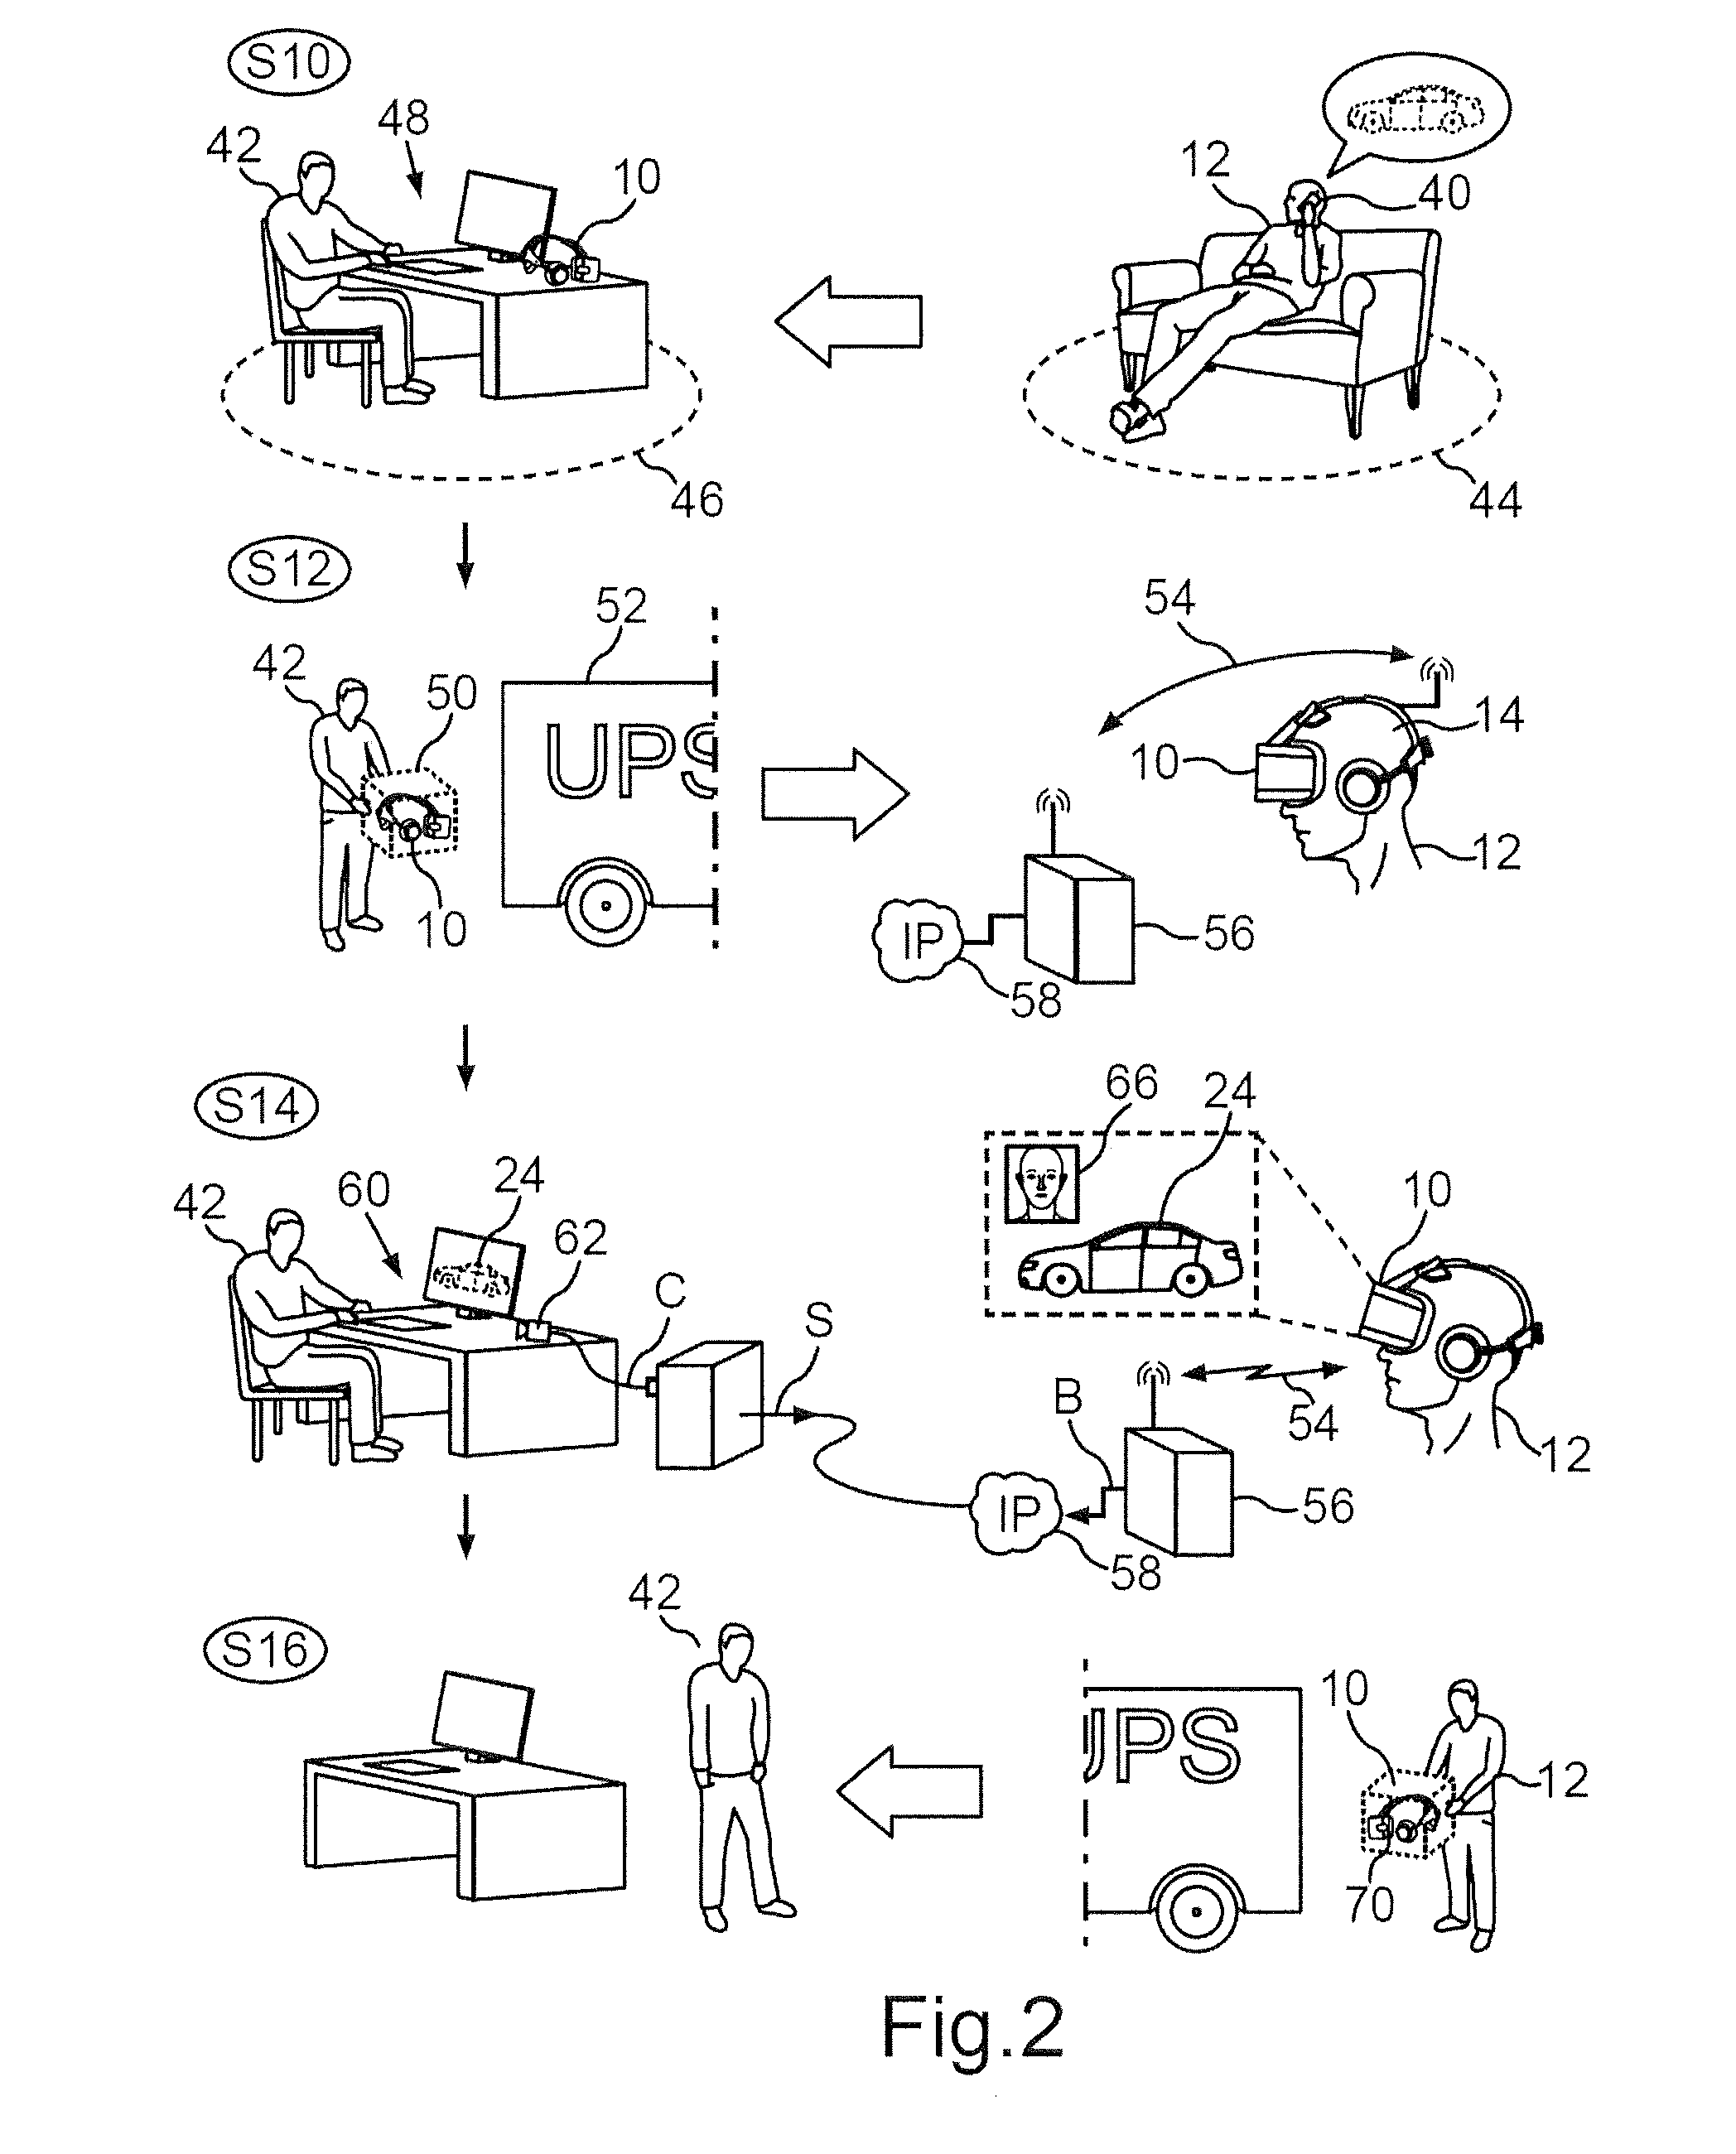 Presentation device for carrying out a product presentation